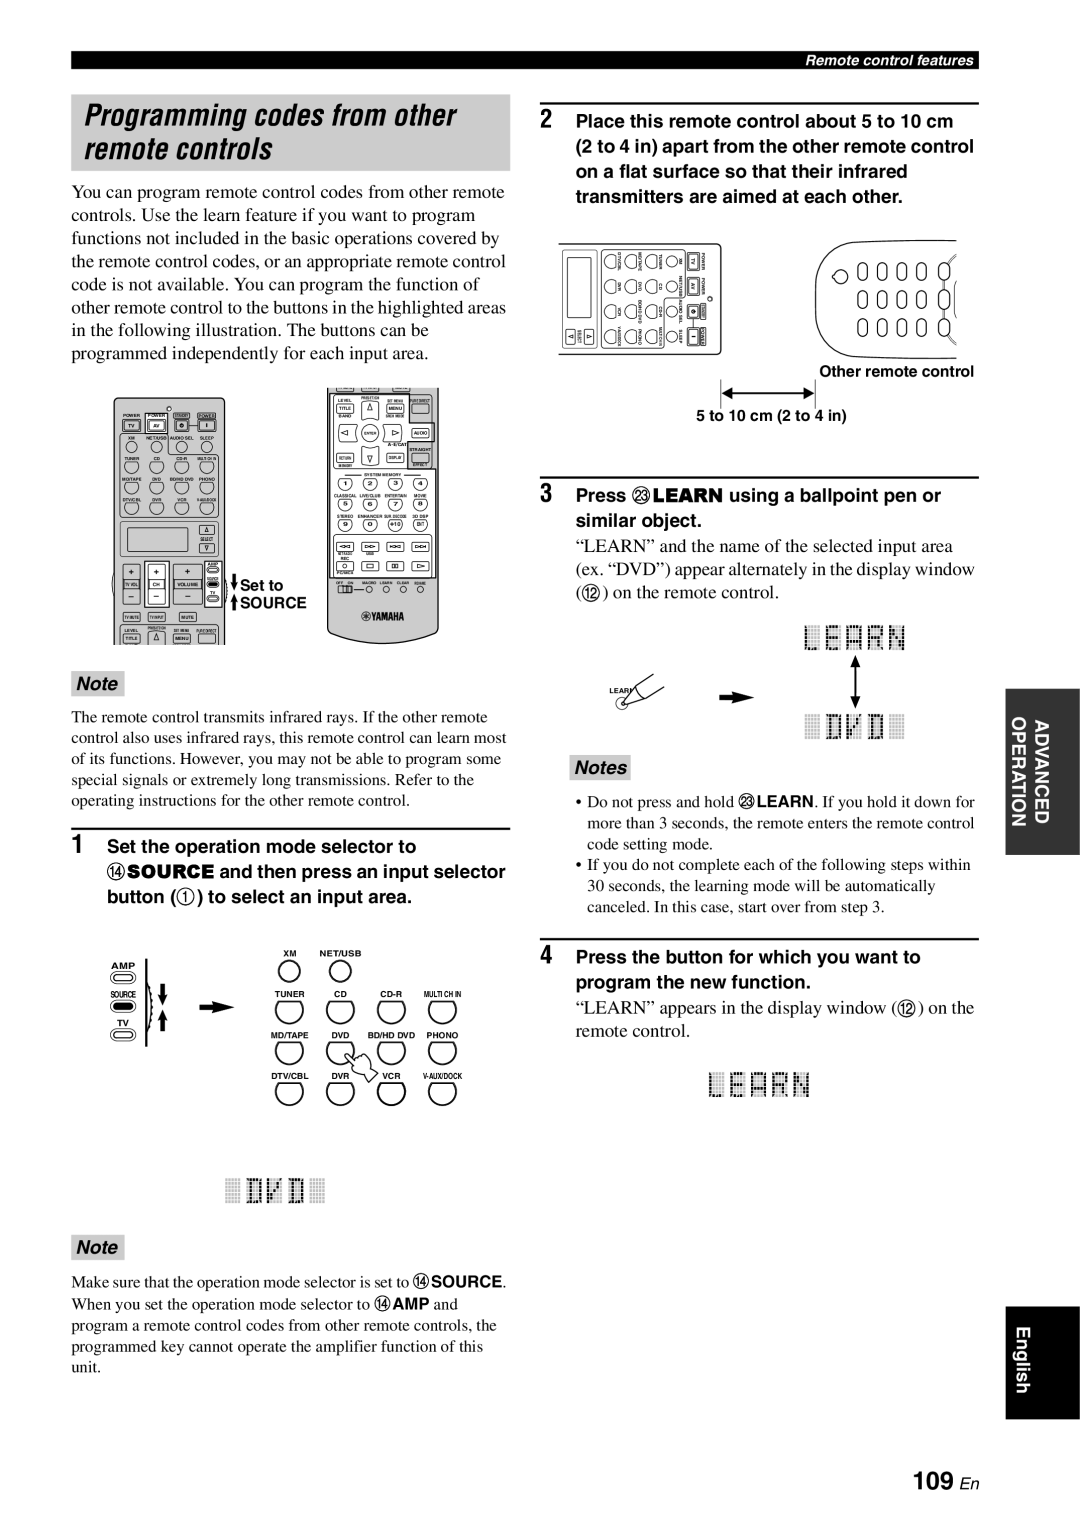 Yamaha RX-V3800 Programming codes from other remote controls, 109 En, Press MLEARN using a ballpoint pen or similar object 